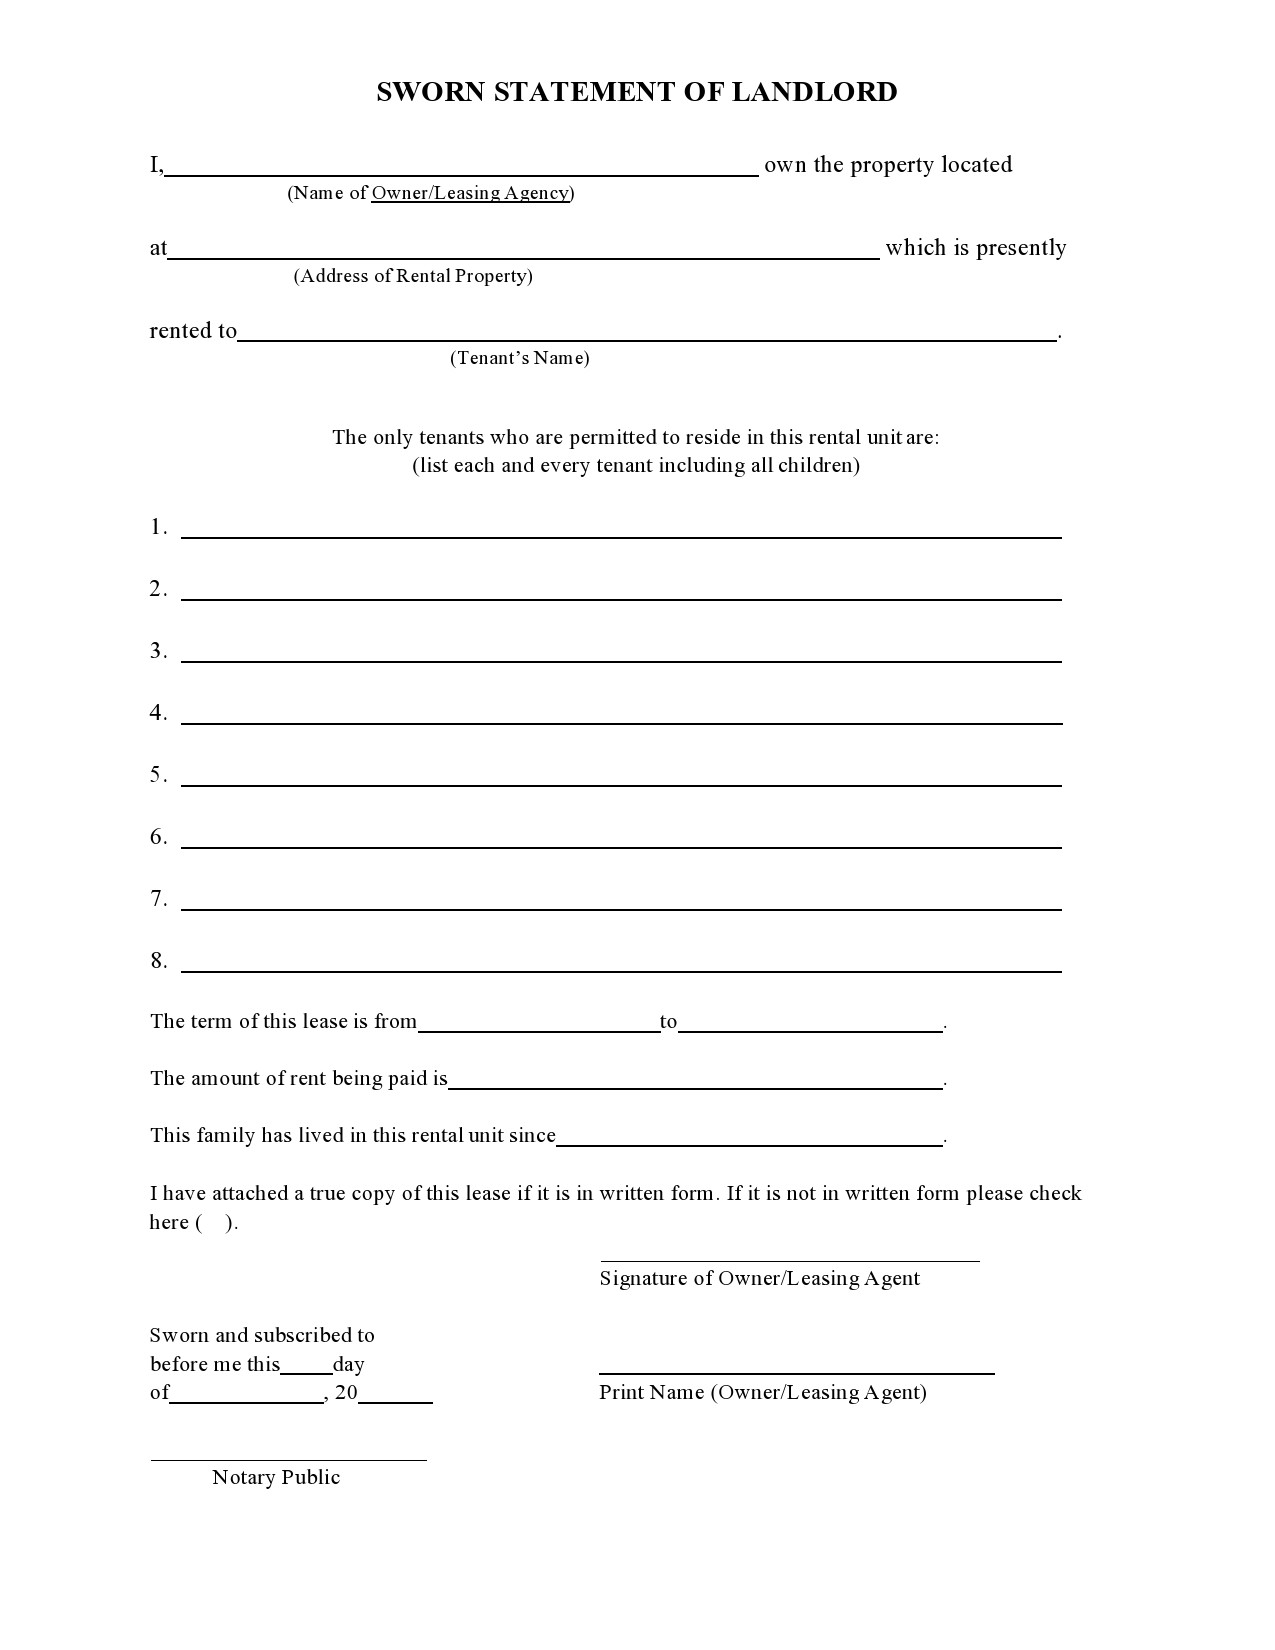 43 Perfect Landlord Statement Forms ( Letters) ᐅ TemplateLab